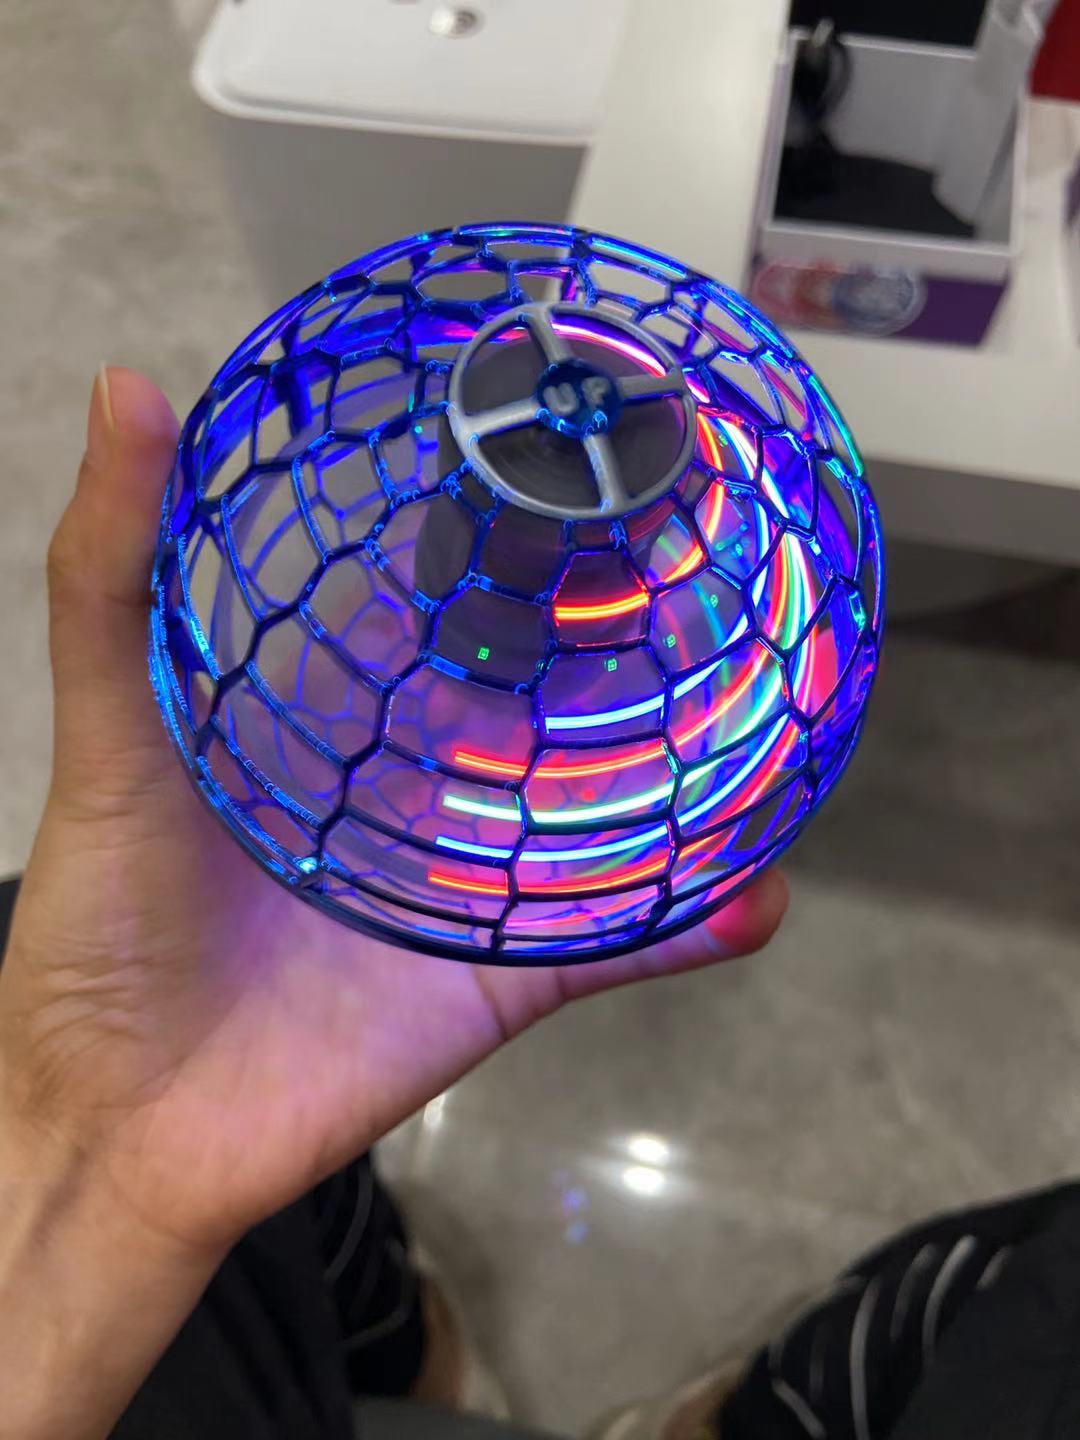 Flynova Pro Flying Ball Spinner Toy  Hand Controlled Drone Helicopter 
 Overview:
 
 FlyNova Pro
 
 Fall resistant,fun and safe
 
 Intelligent design,Easy to operate,you can also fly
 
 Fly as soon ad you throw it
 
 Full protection dehallowen giftsMy Tech AddictMy Tech Addict